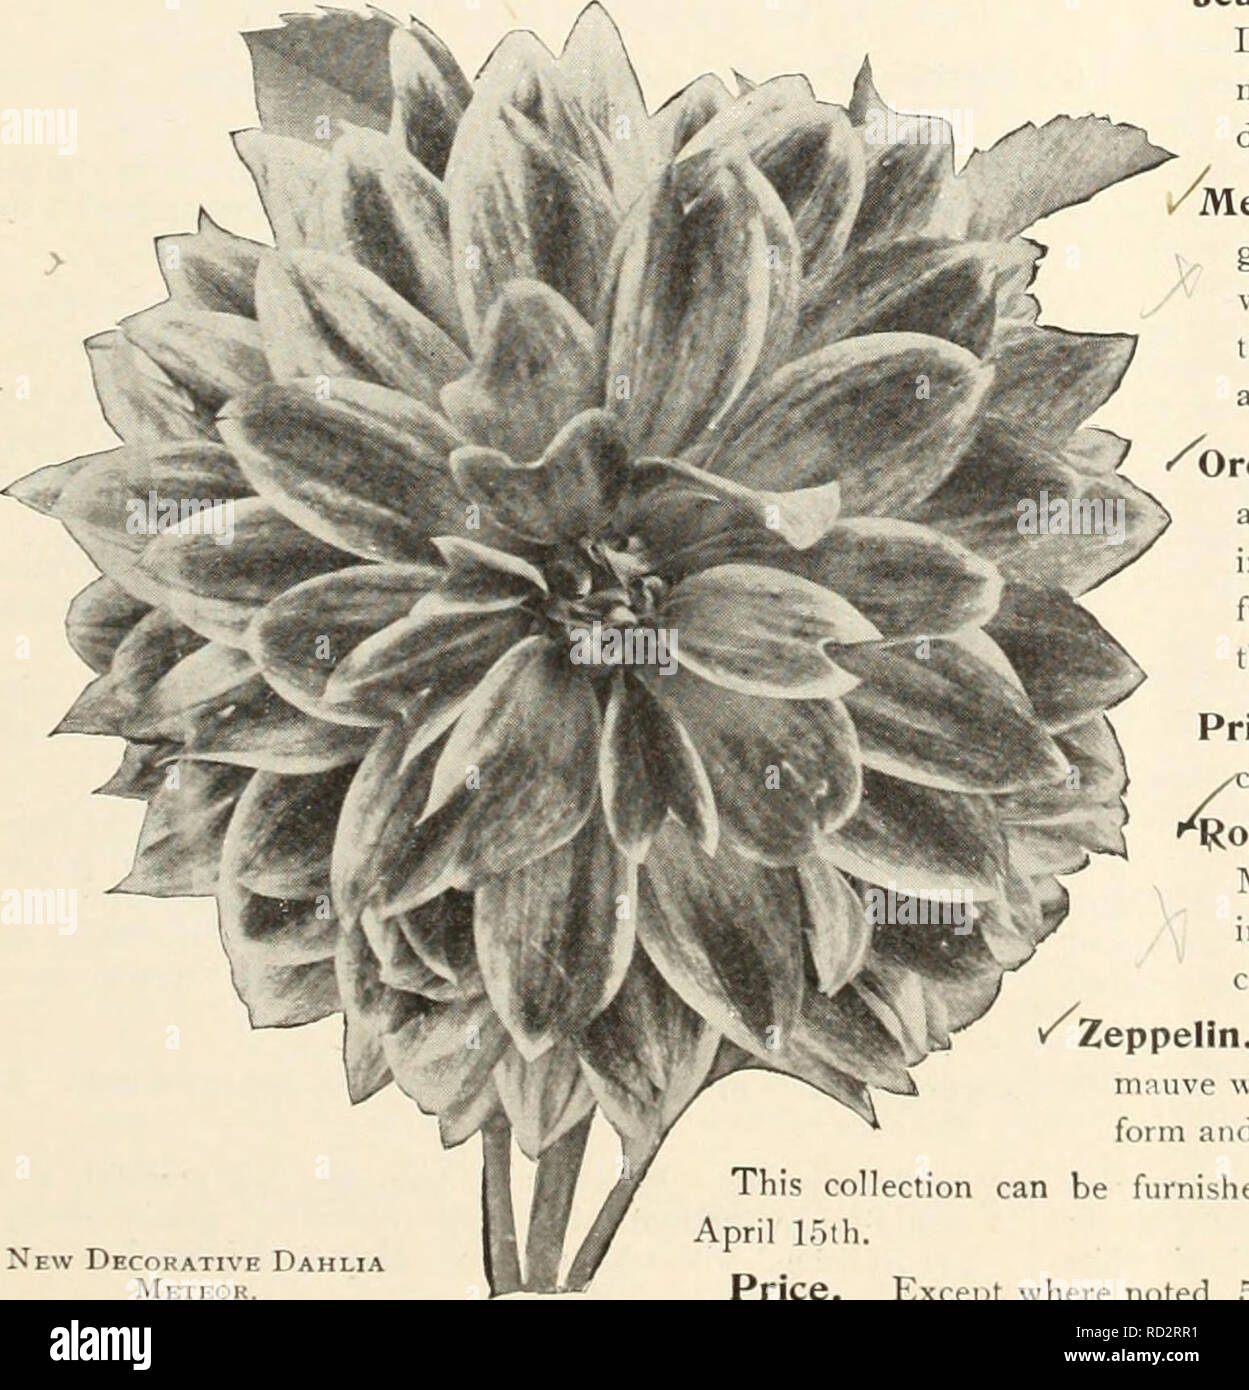 . Dahlias. Flowers Seeds Catalogs; Nurseries (Horticulture) Catalogs; Dahlias Seeds Catalogs. New Decorative Dahlia Breezb Lawn.. New Decorative Dahlia Meteor. Jean Wood. Probably a seedling of Mme, Van den Daele and similar in color, a delicate silvery-rose, but a much shaplier flower than its parent, being of true decorative form. An early, free and constant bloomer. Meteor. An attractive, showy, fancy variety; the ground color a brilliant cardinal-red, edged and marked with primrose-yellow. The flowers are not large, three-and-one-half inches in diameter, of perfect form and very freely pro Stock Photo